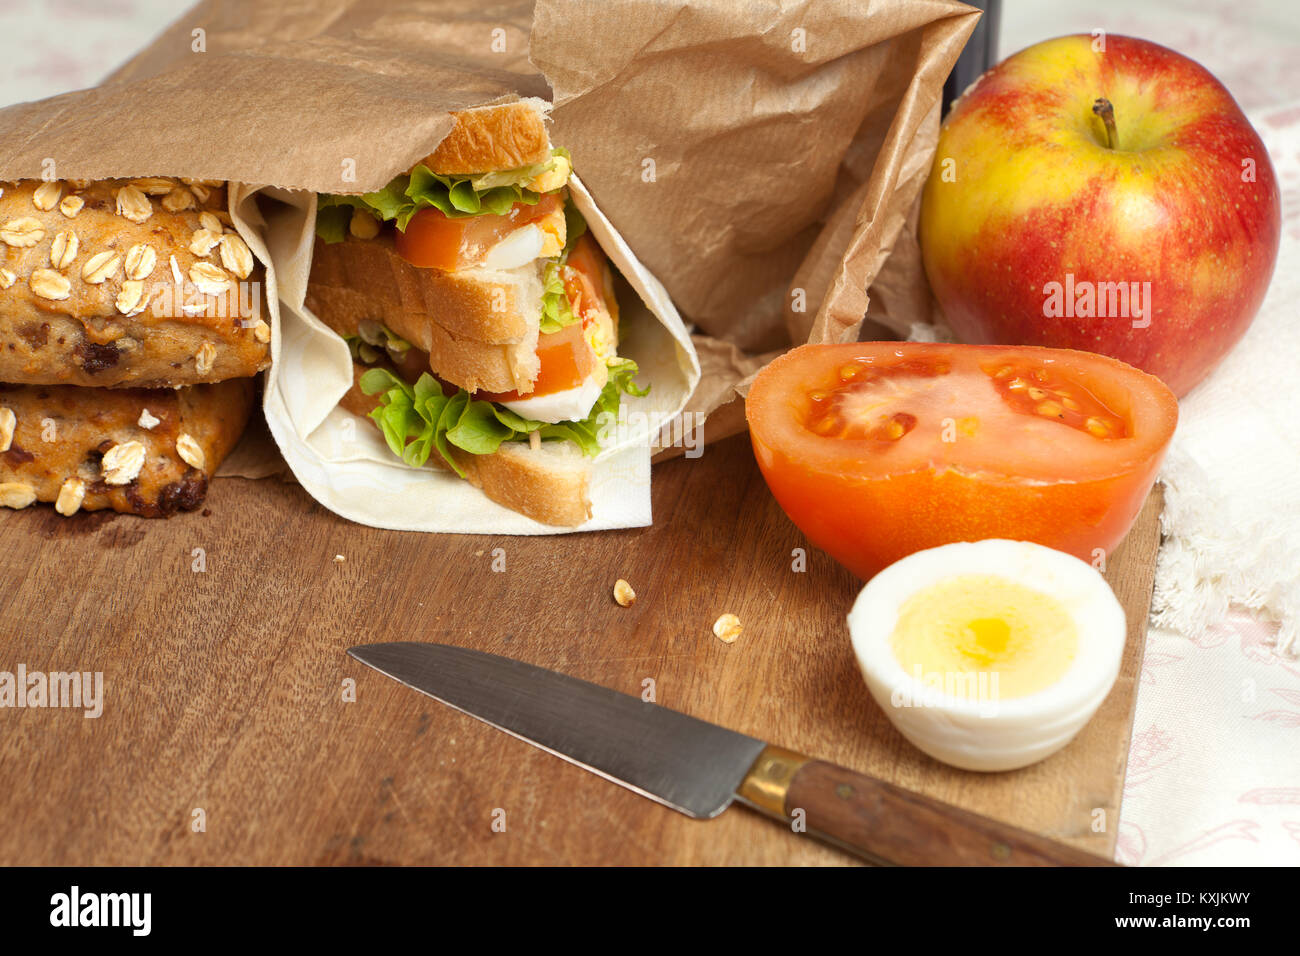 Brown paper bag with sandwich and apple for lunch Stock Photo